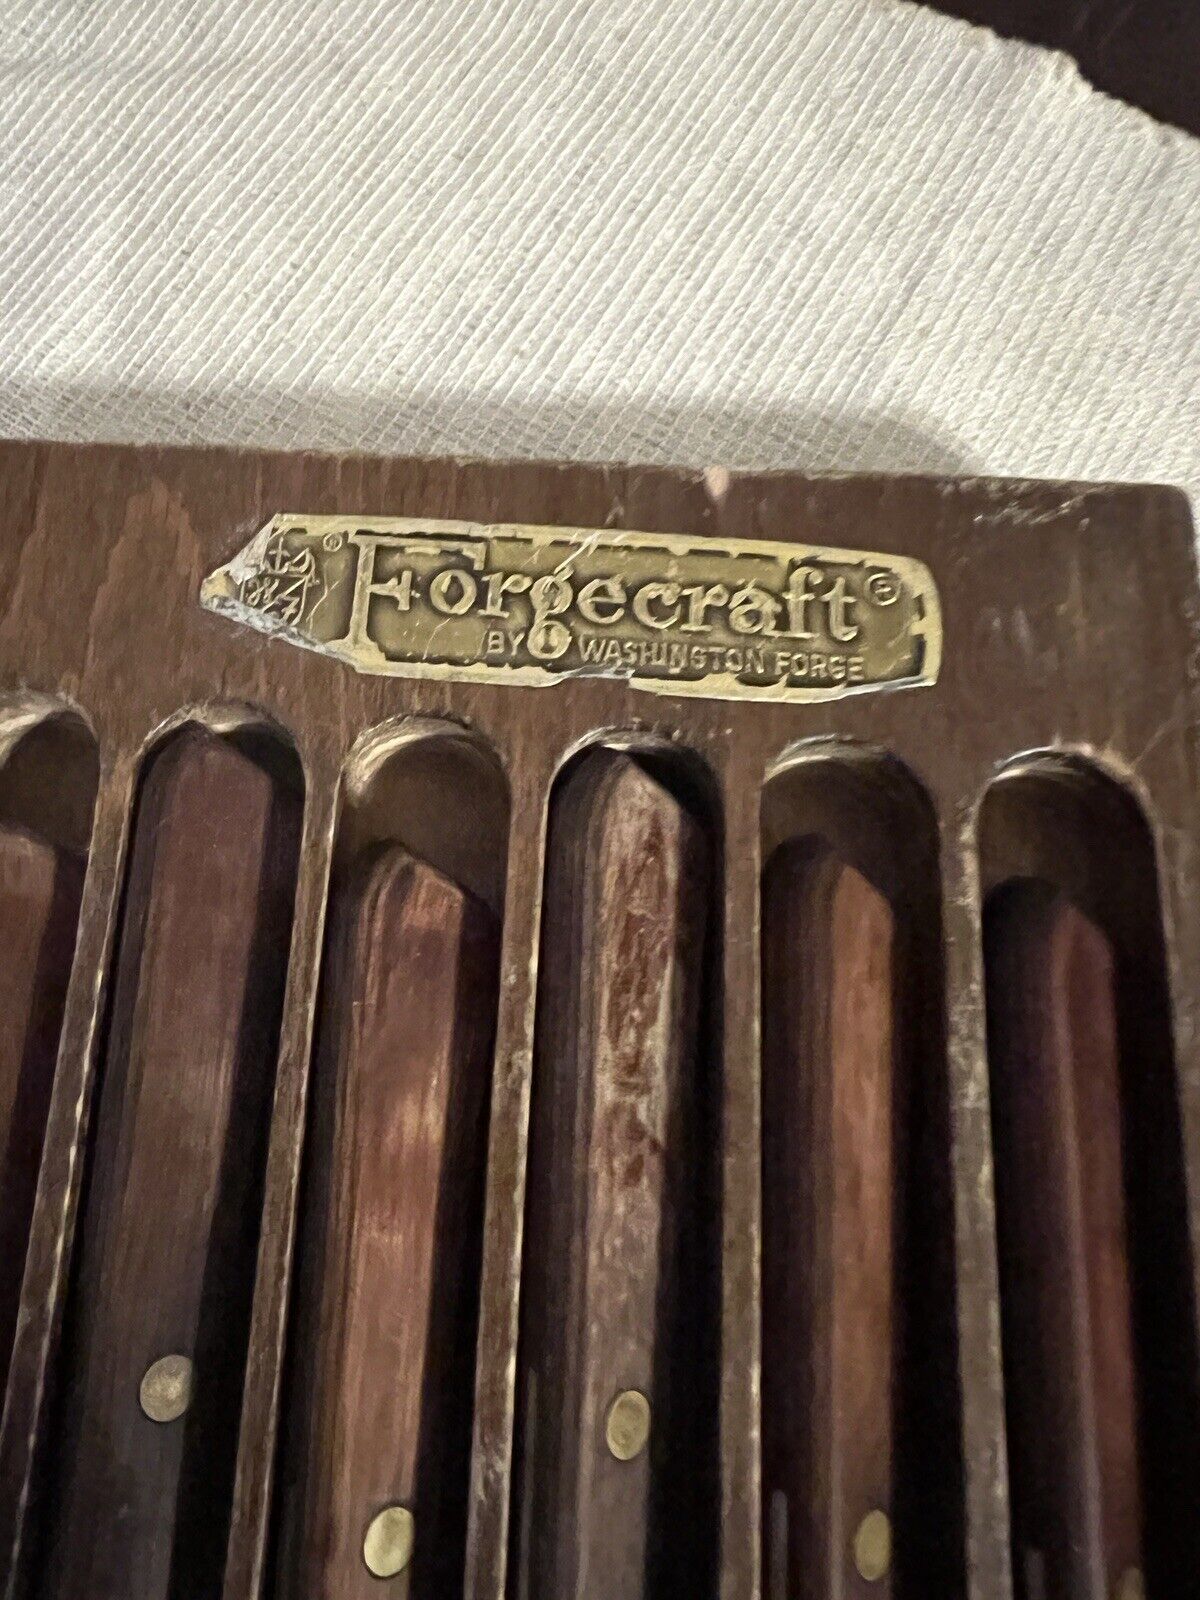 vintage forgecraft by Washington forge set of 6 serrated set with wood tray